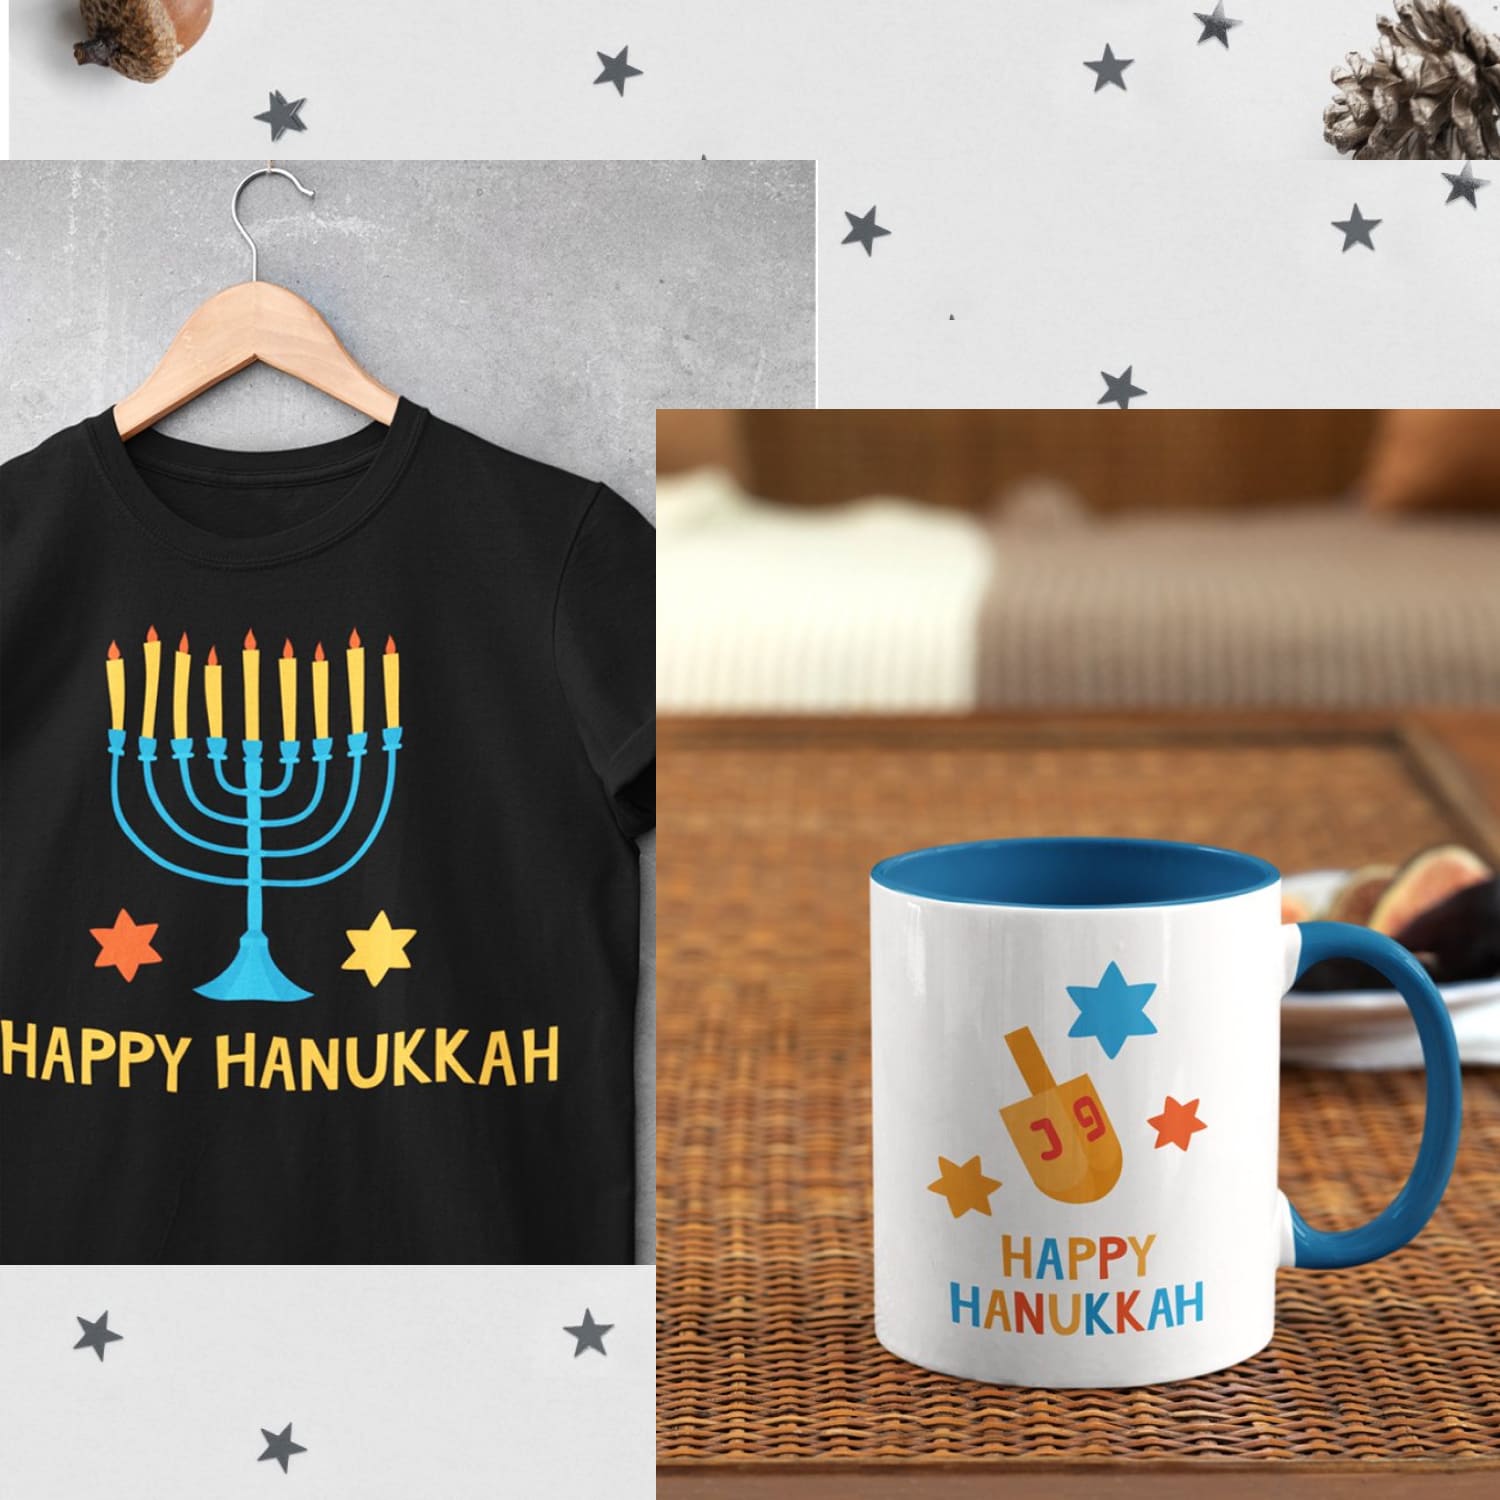 Preview happy hanukkah. elements and greeting cards.